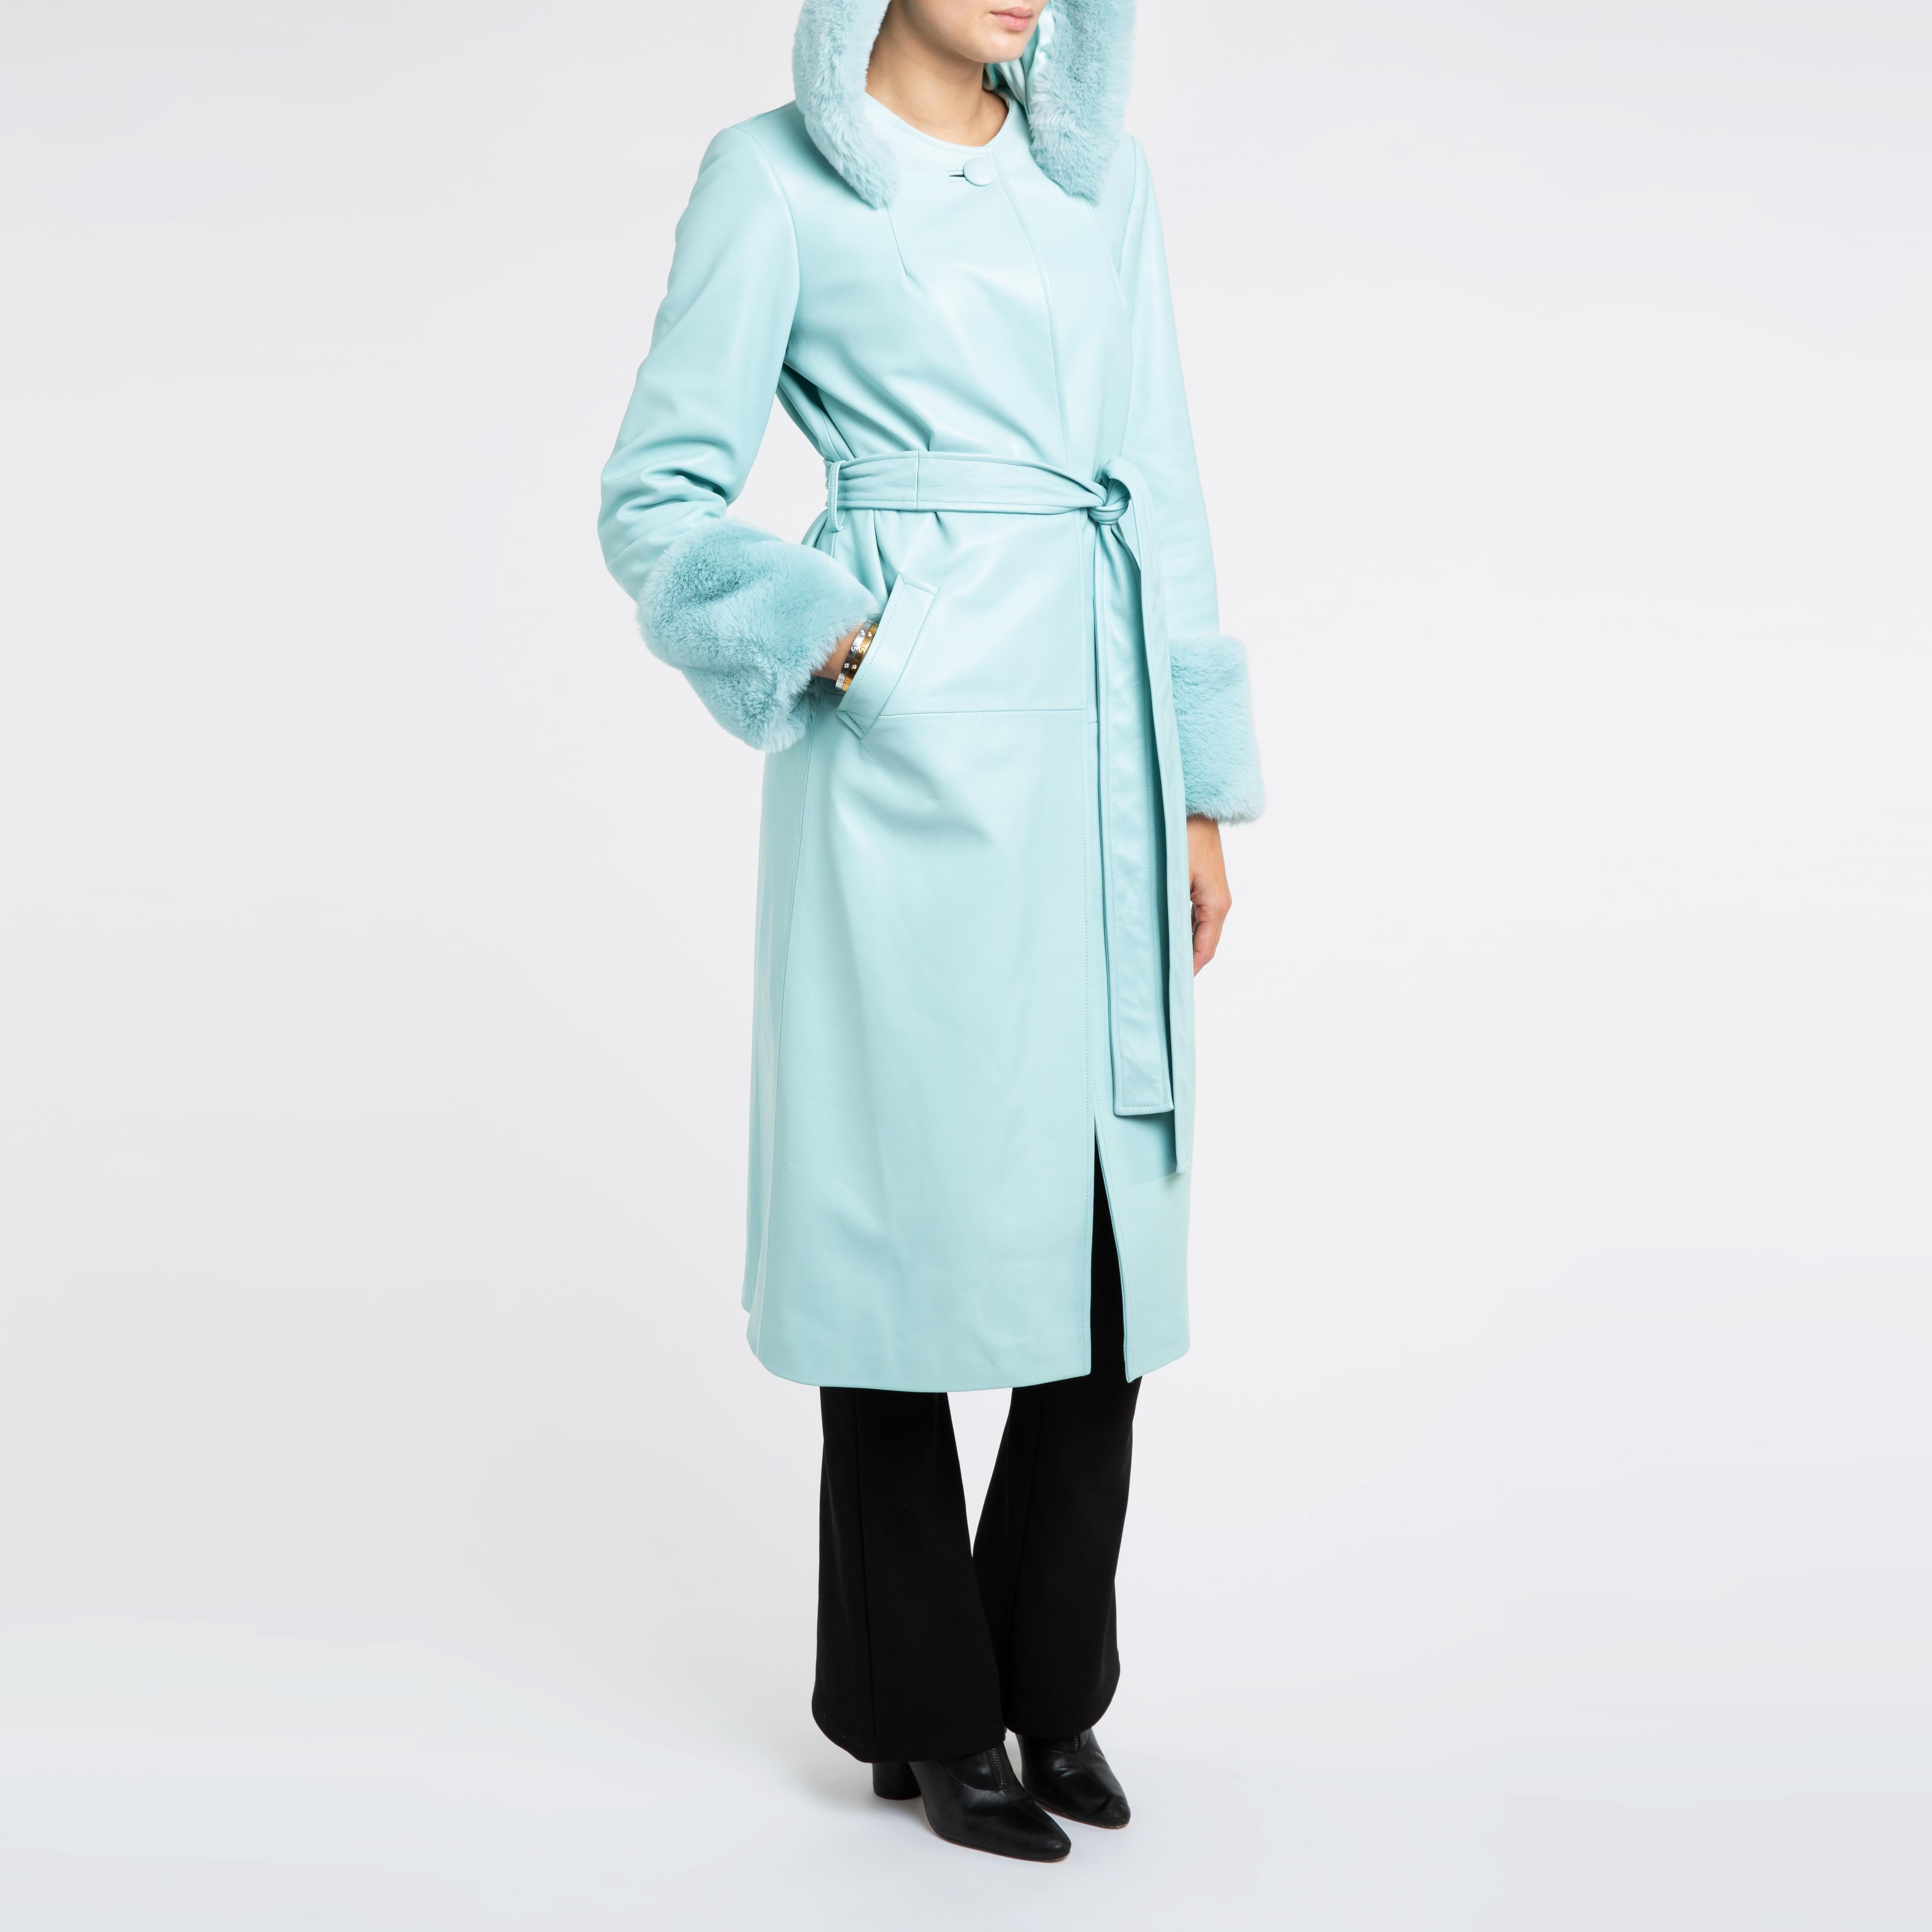 Verheyen London Hooded Leather Coat in Blue Aquamarine & Faux Fur - Size uk 10

Handmade in London, made with 100% Italian Lambs Leather and the highest quality of faux fur to match, this luxury item is an investment piece to wear for a lifetime. 